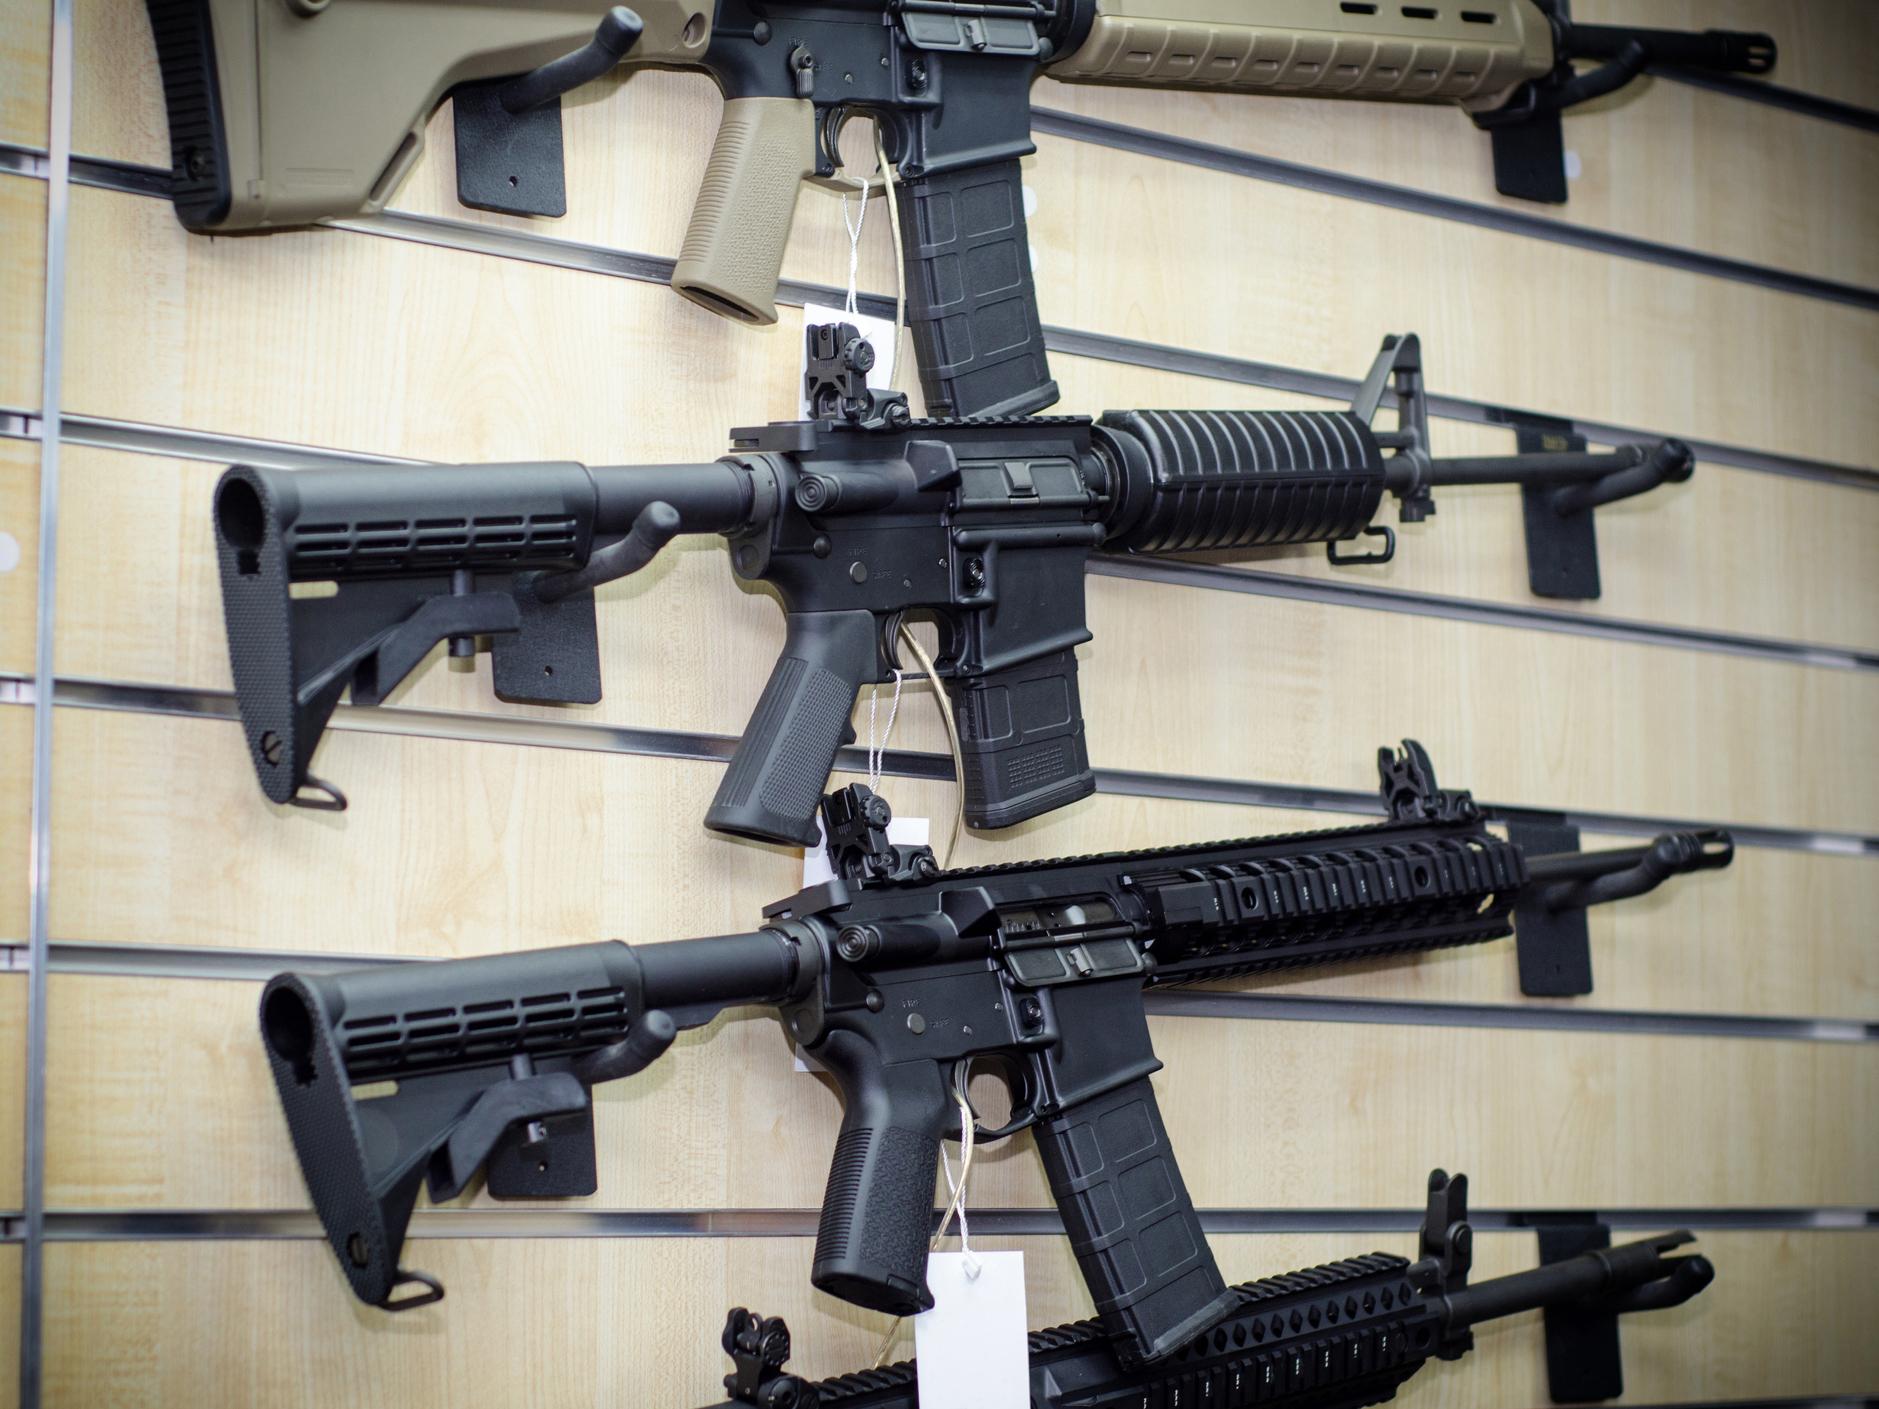 The suspects are accused of trying to sell several homemade AR-15 assault rifles in New Jersey